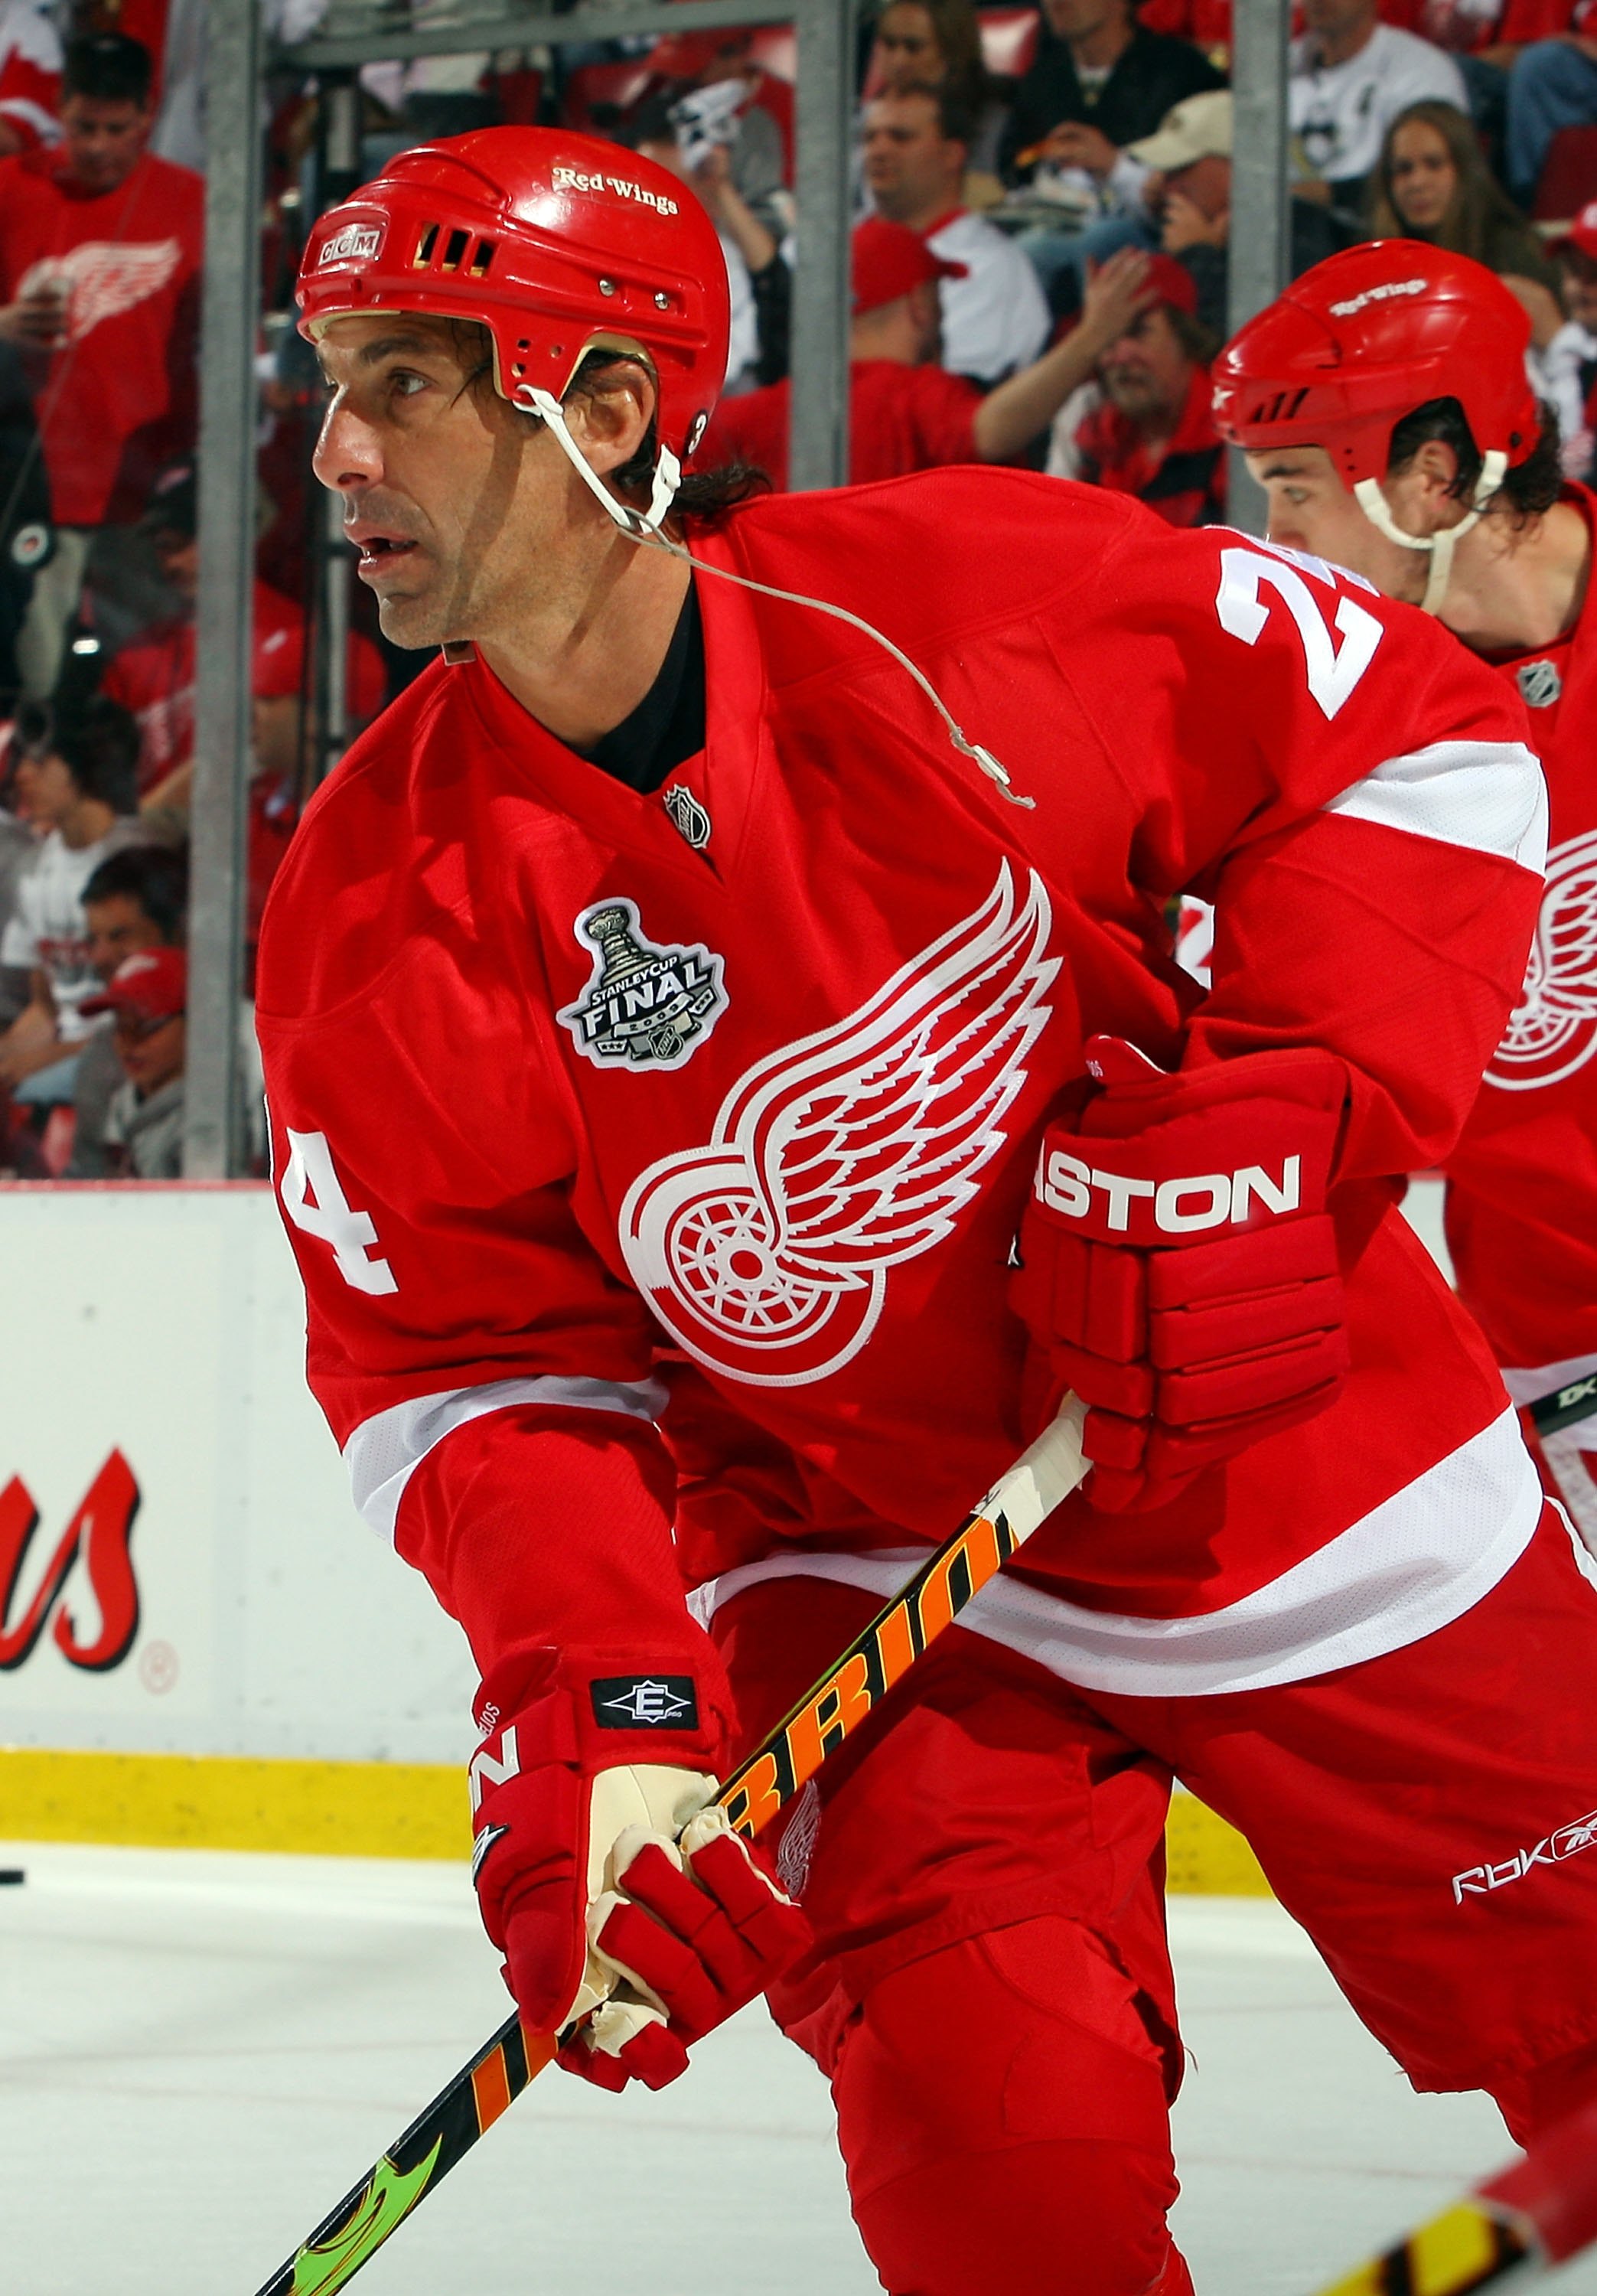 Former Red Wing Chris Chelios enjoying stint with Wolves, more family time  